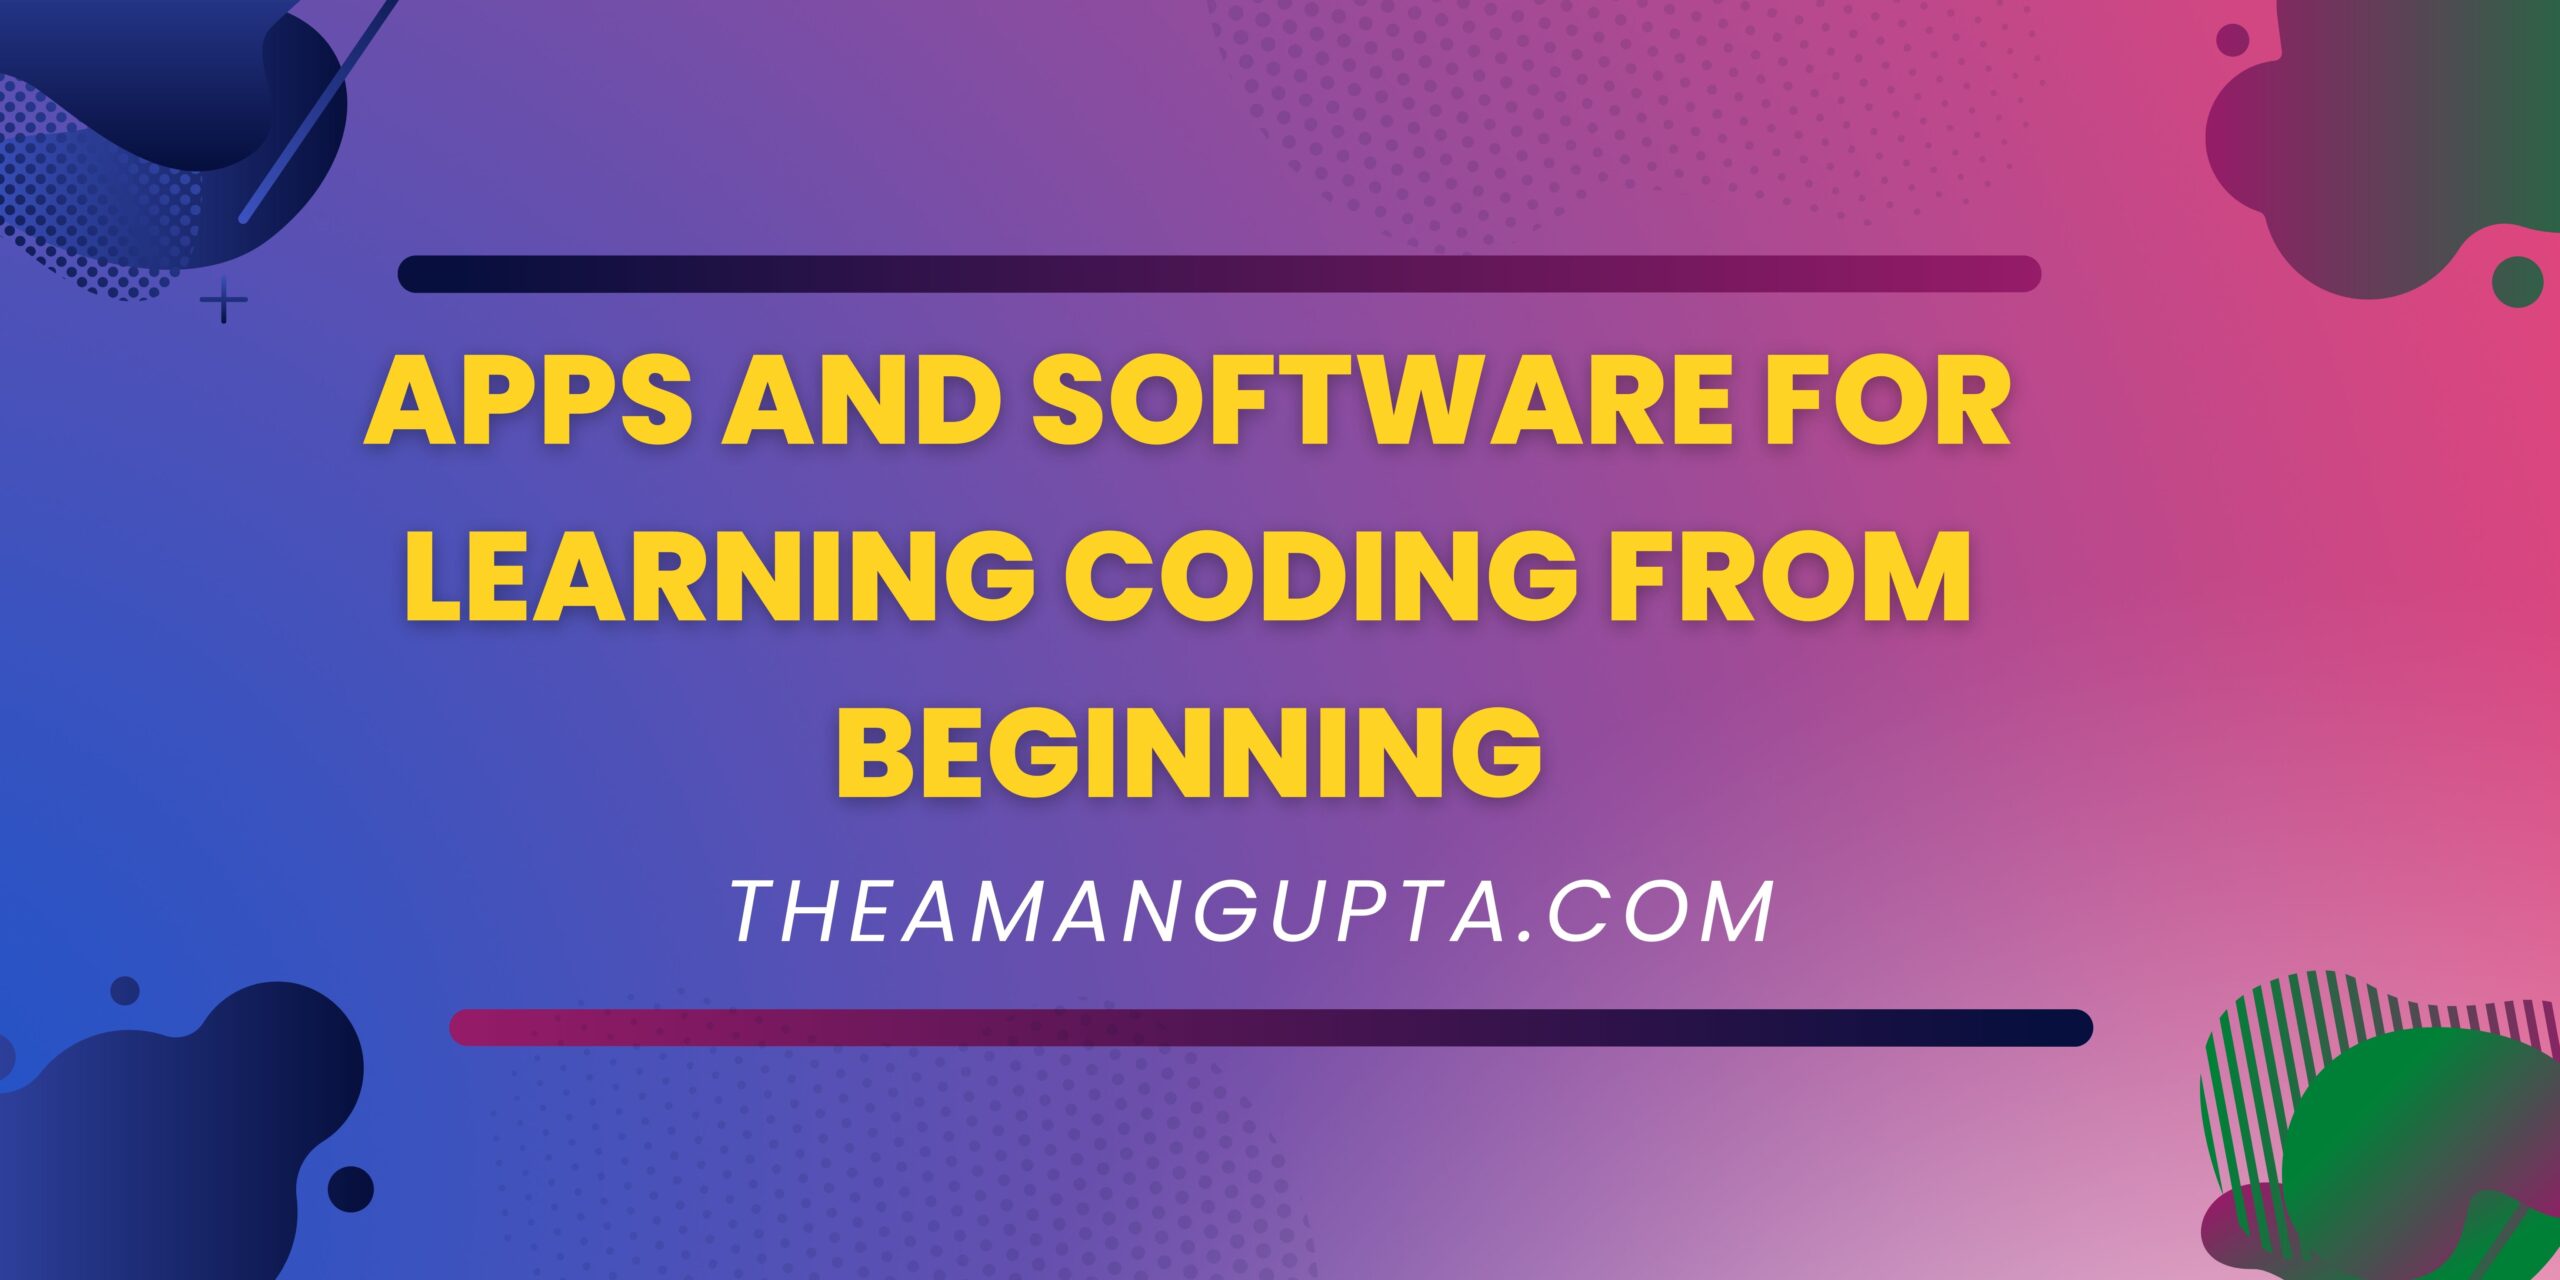 Apps And Software For Learning Coding From Beginning|Learn Coding From Beginning| Tannu Rani| Theamangupta